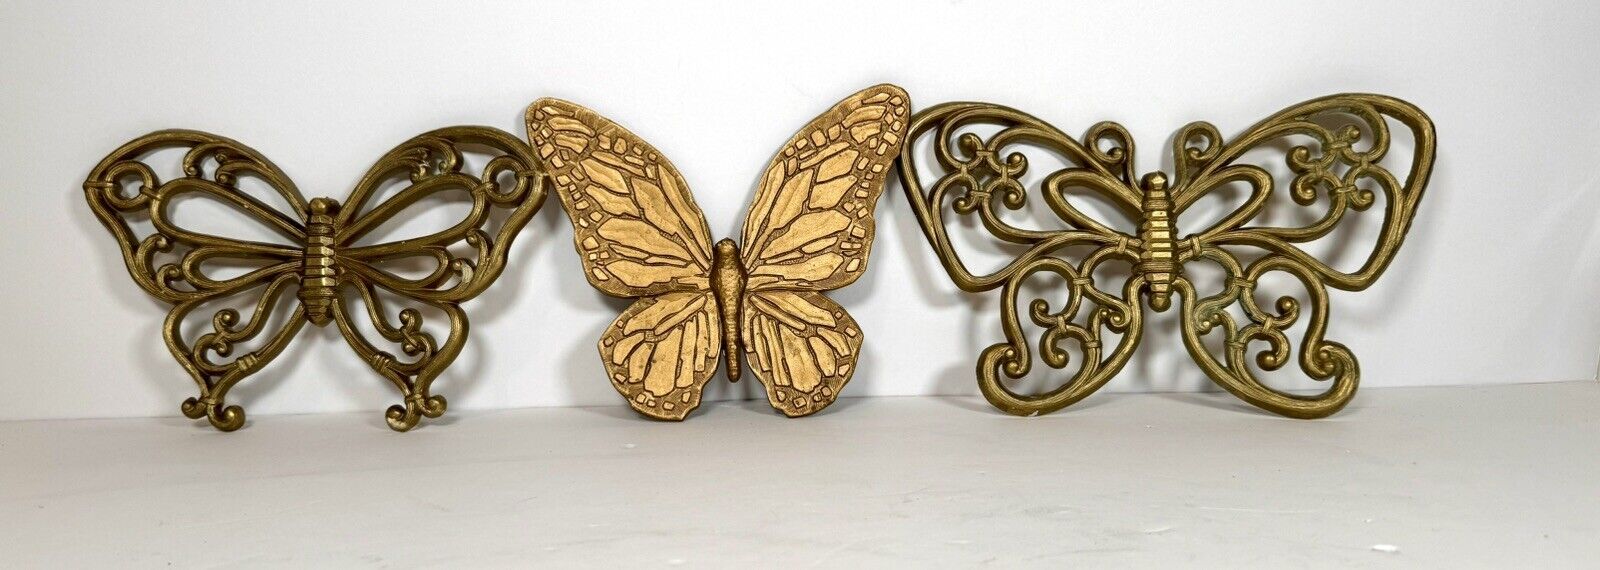 Vintage Homco Gold Butterflies Set of 3 Wall Plaques Hangings Faux Wicker